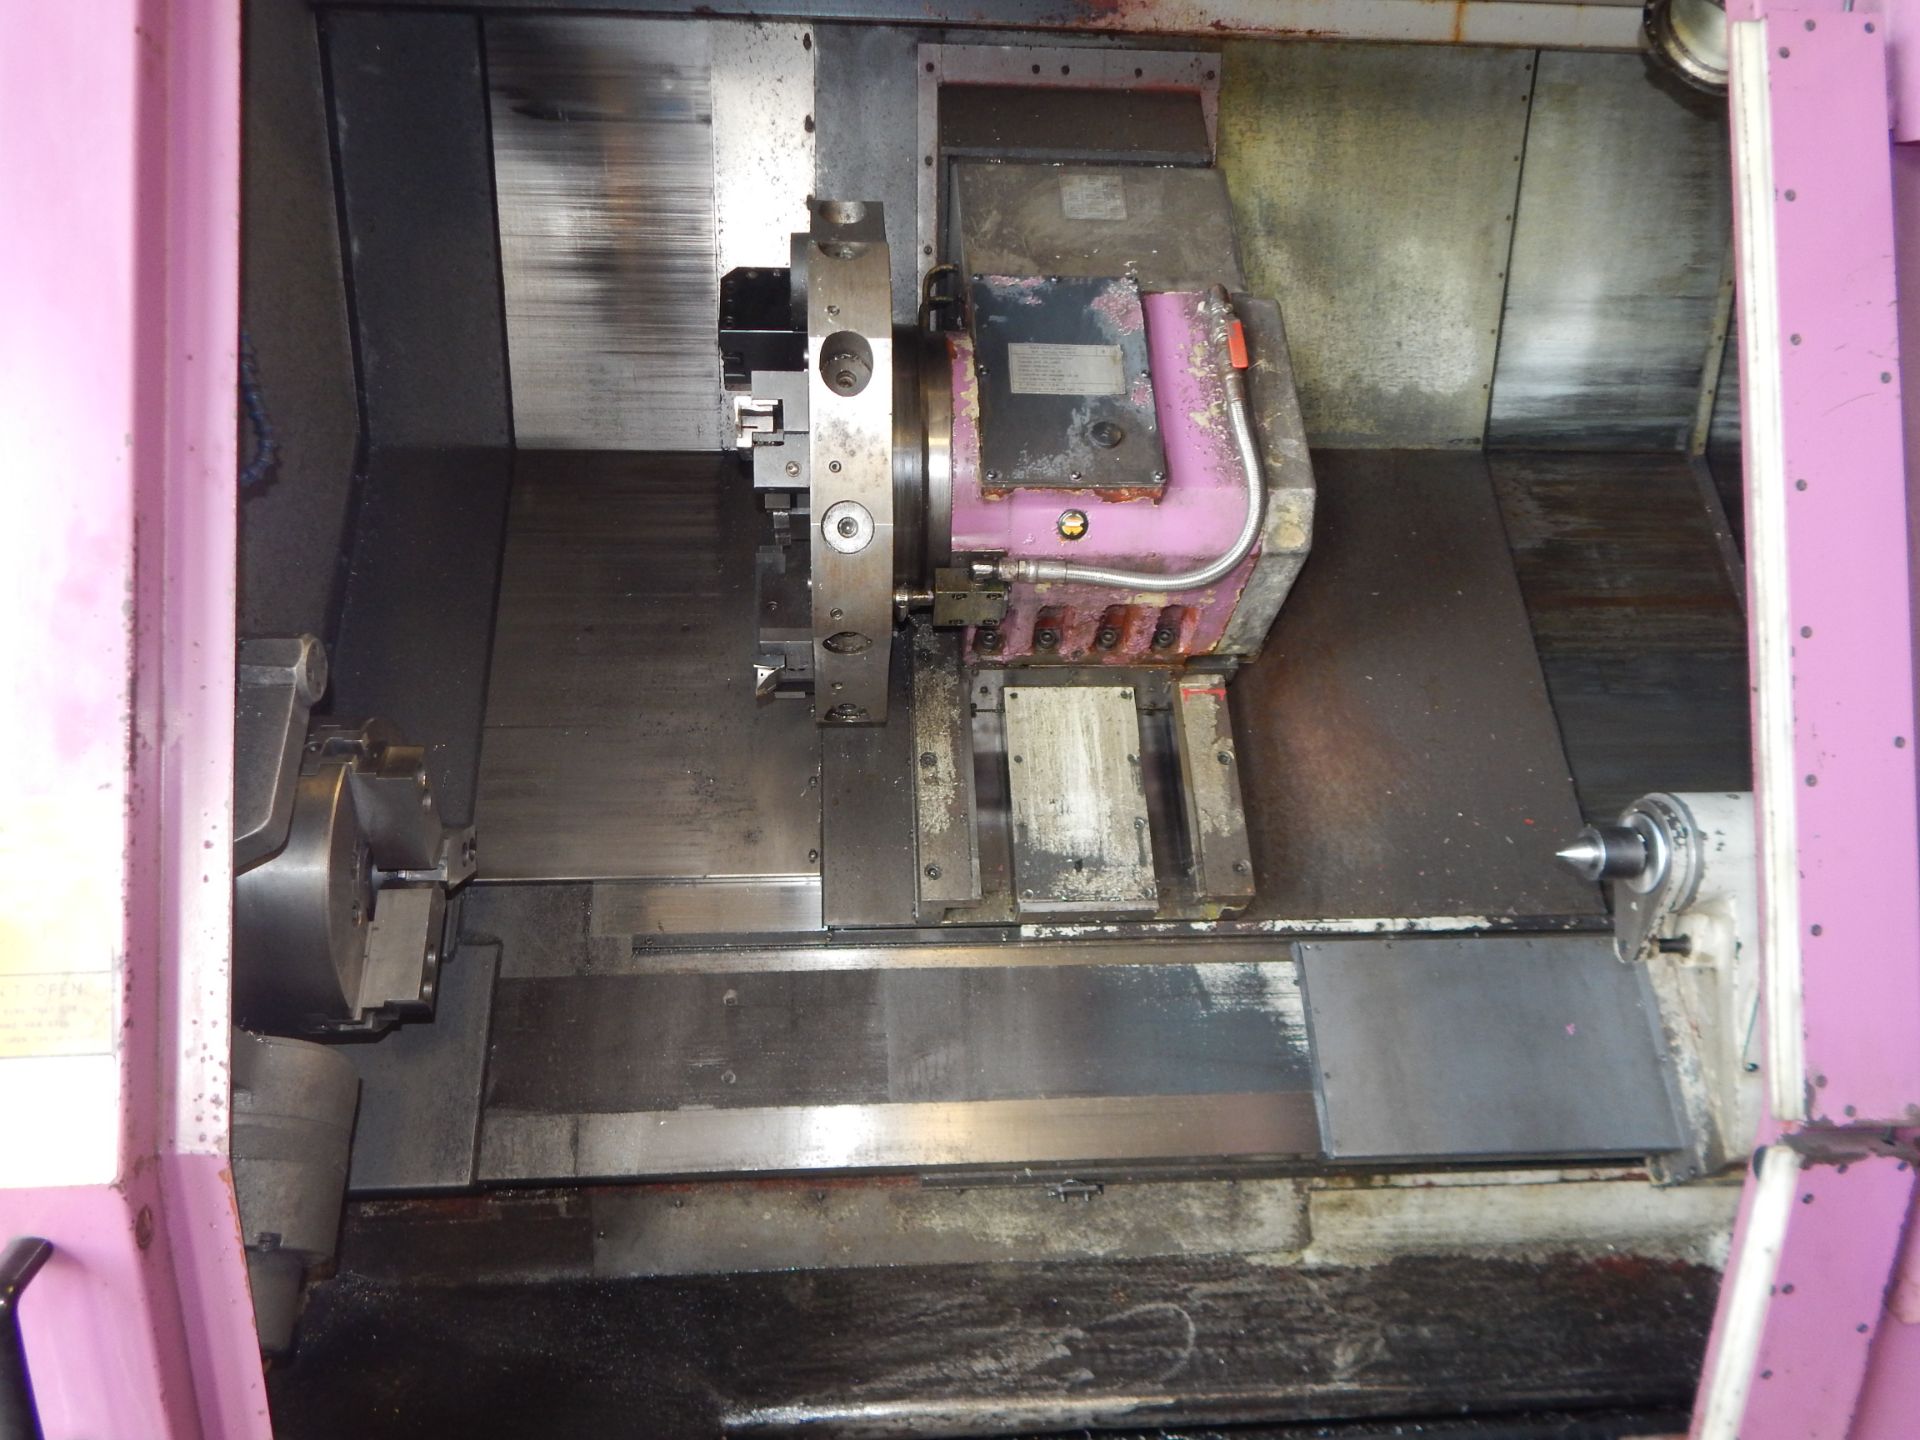 YANG (2000) CK-3B CNC TURNING CENTER WITH FANUC CNC CONTROL, 12" CHUCK, 26" SWING OVER BED, 15" MAX. - Image 2 of 3